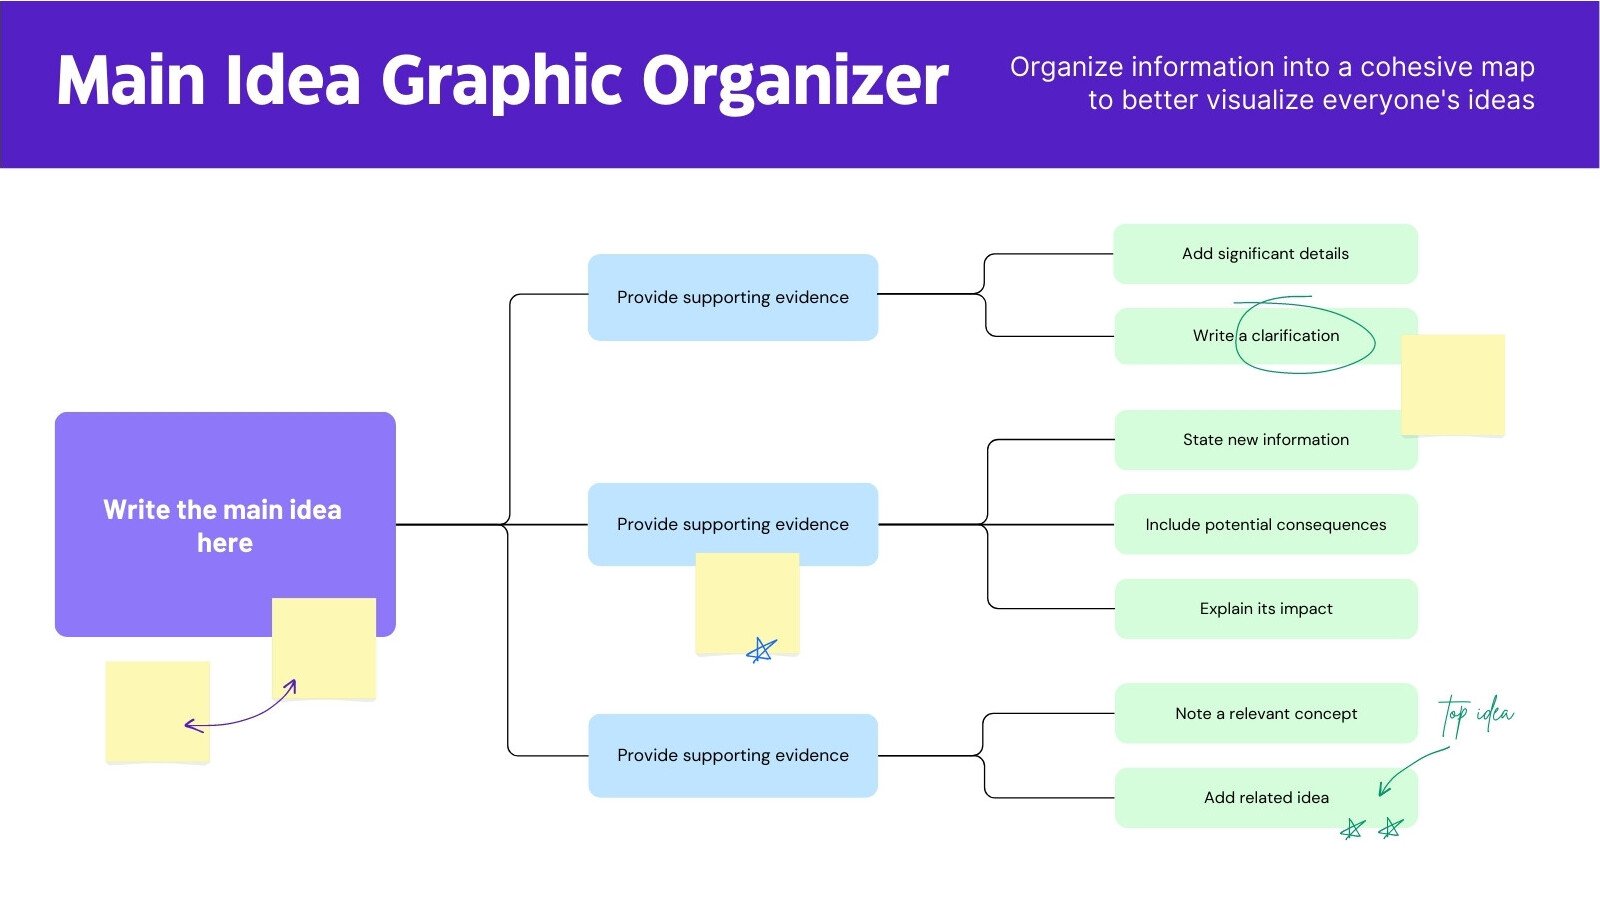 Main Idea Graphic Organizer Planning Whiteboard in Purple Blue Green Simple Colorful Style